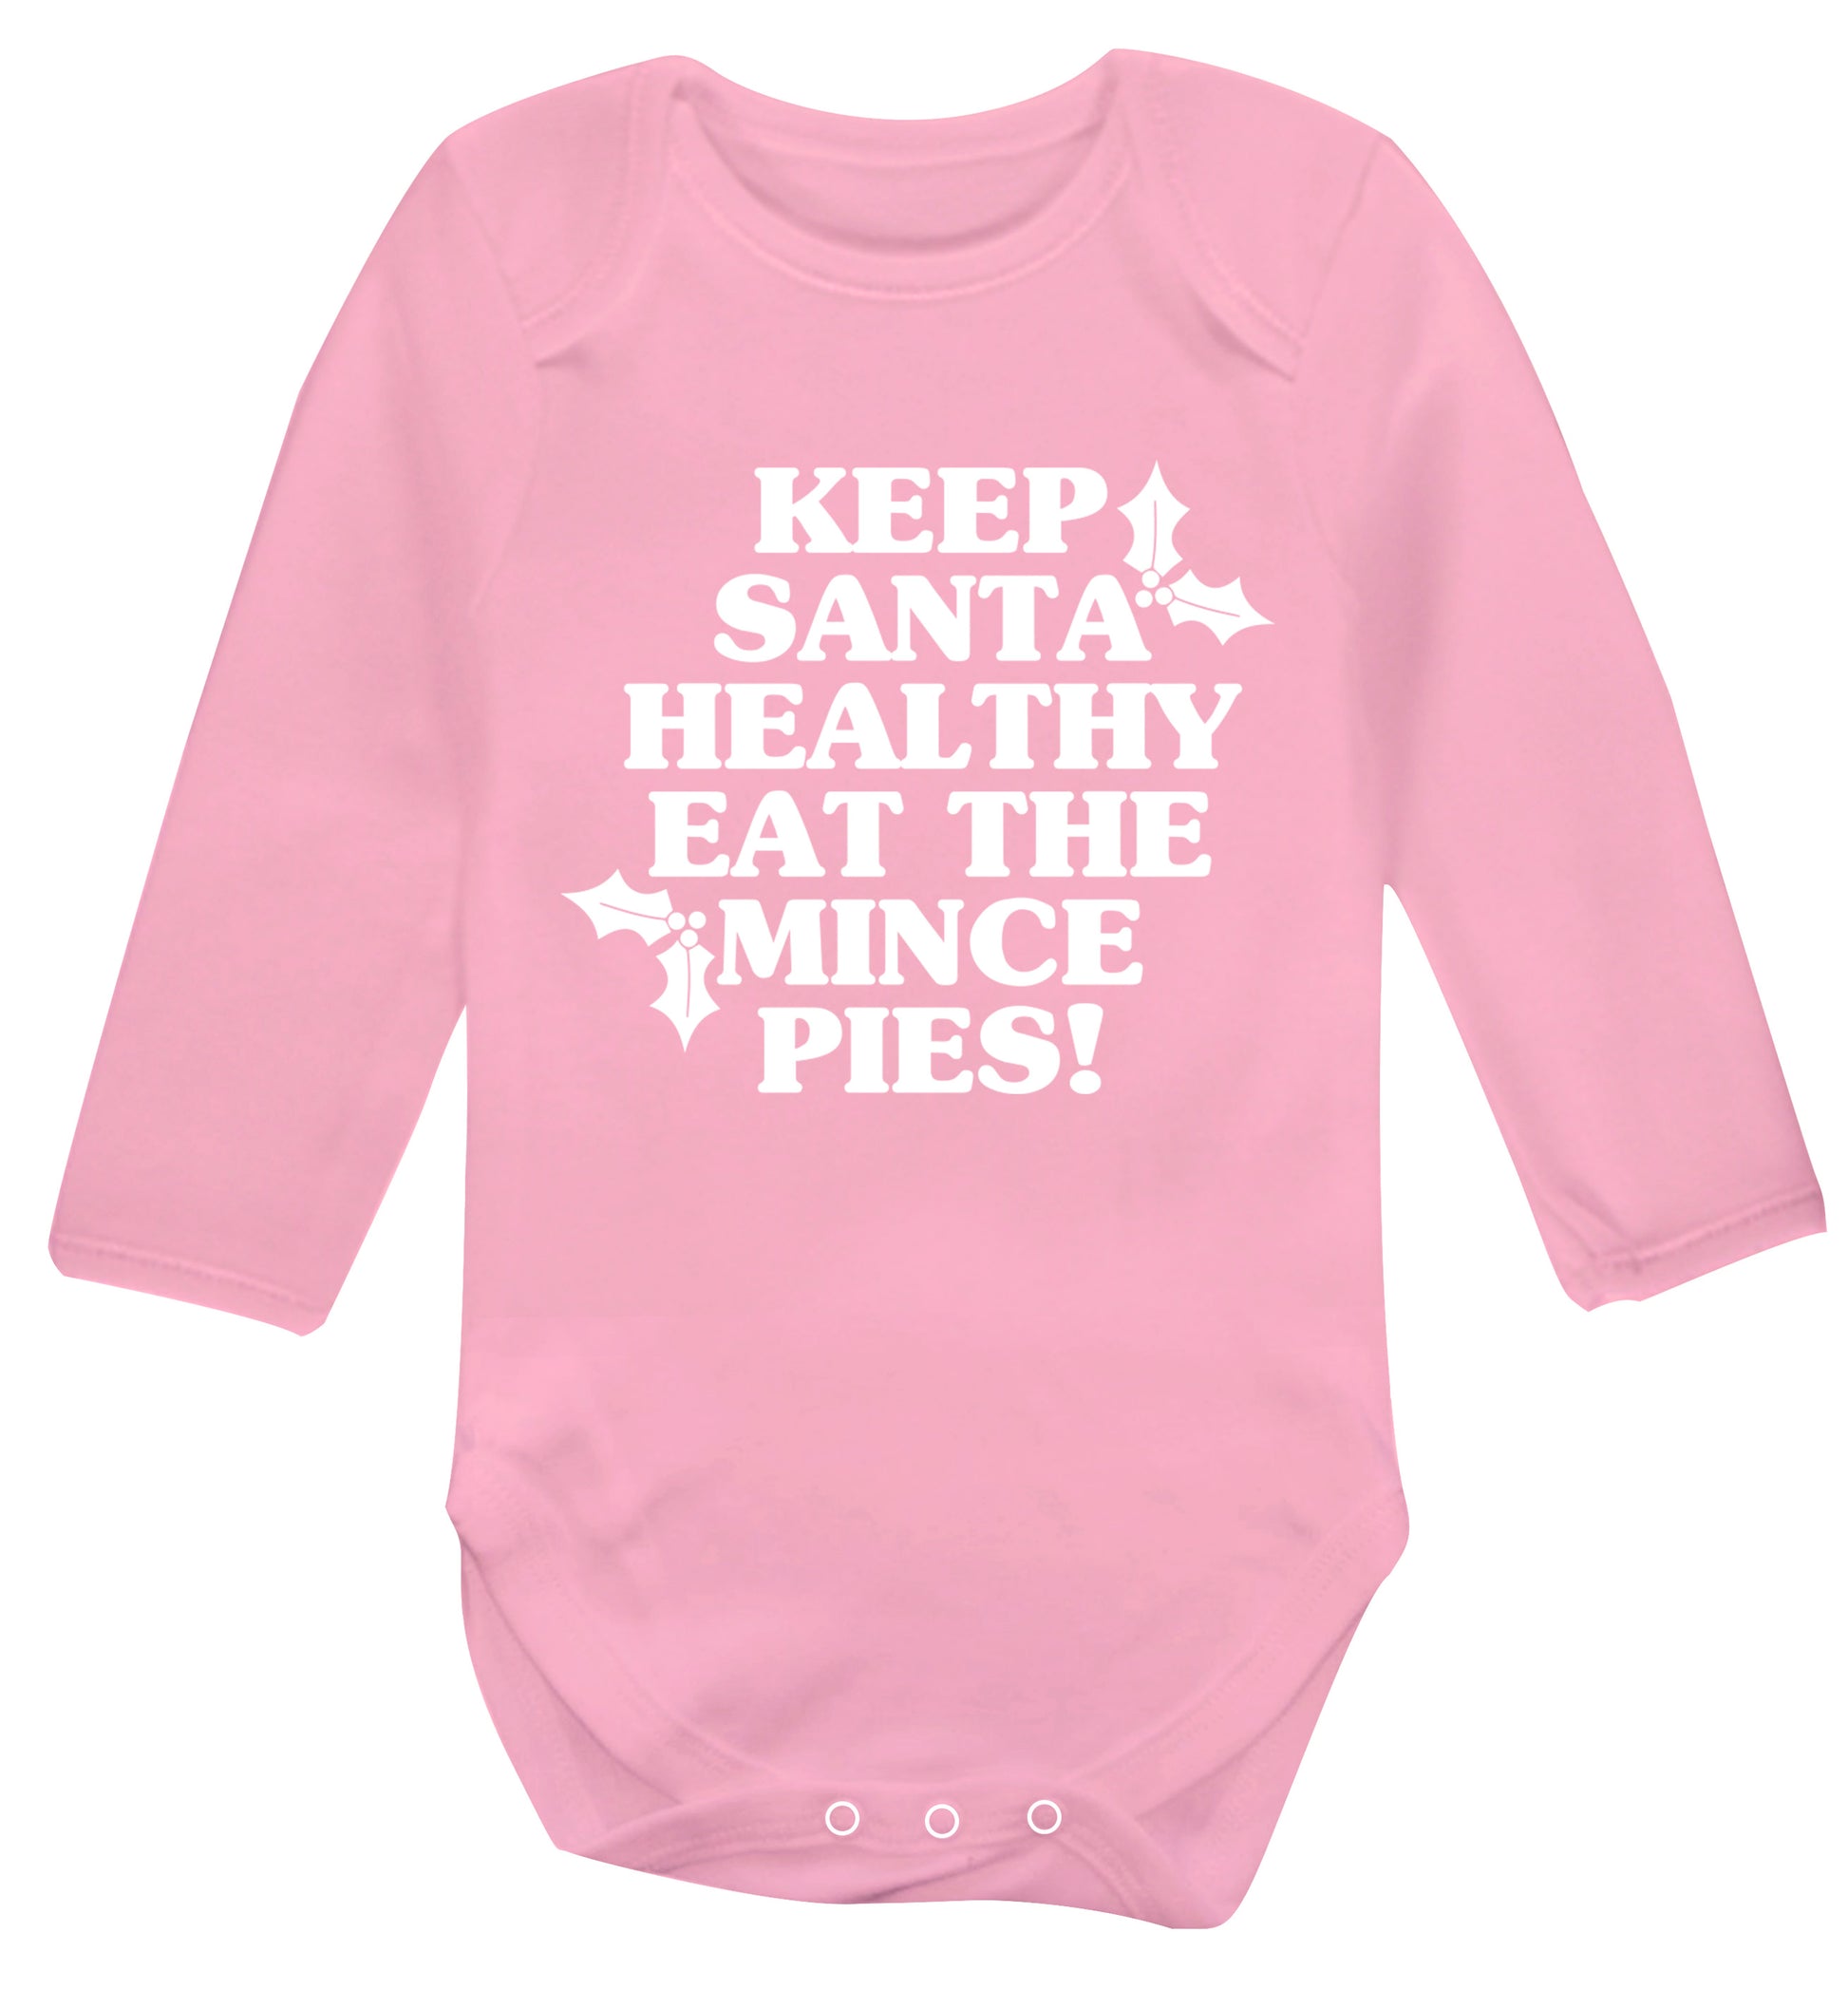 Keep santa healthy eat the mince pies Baby Vest long sleeved pale pink 6-12 months